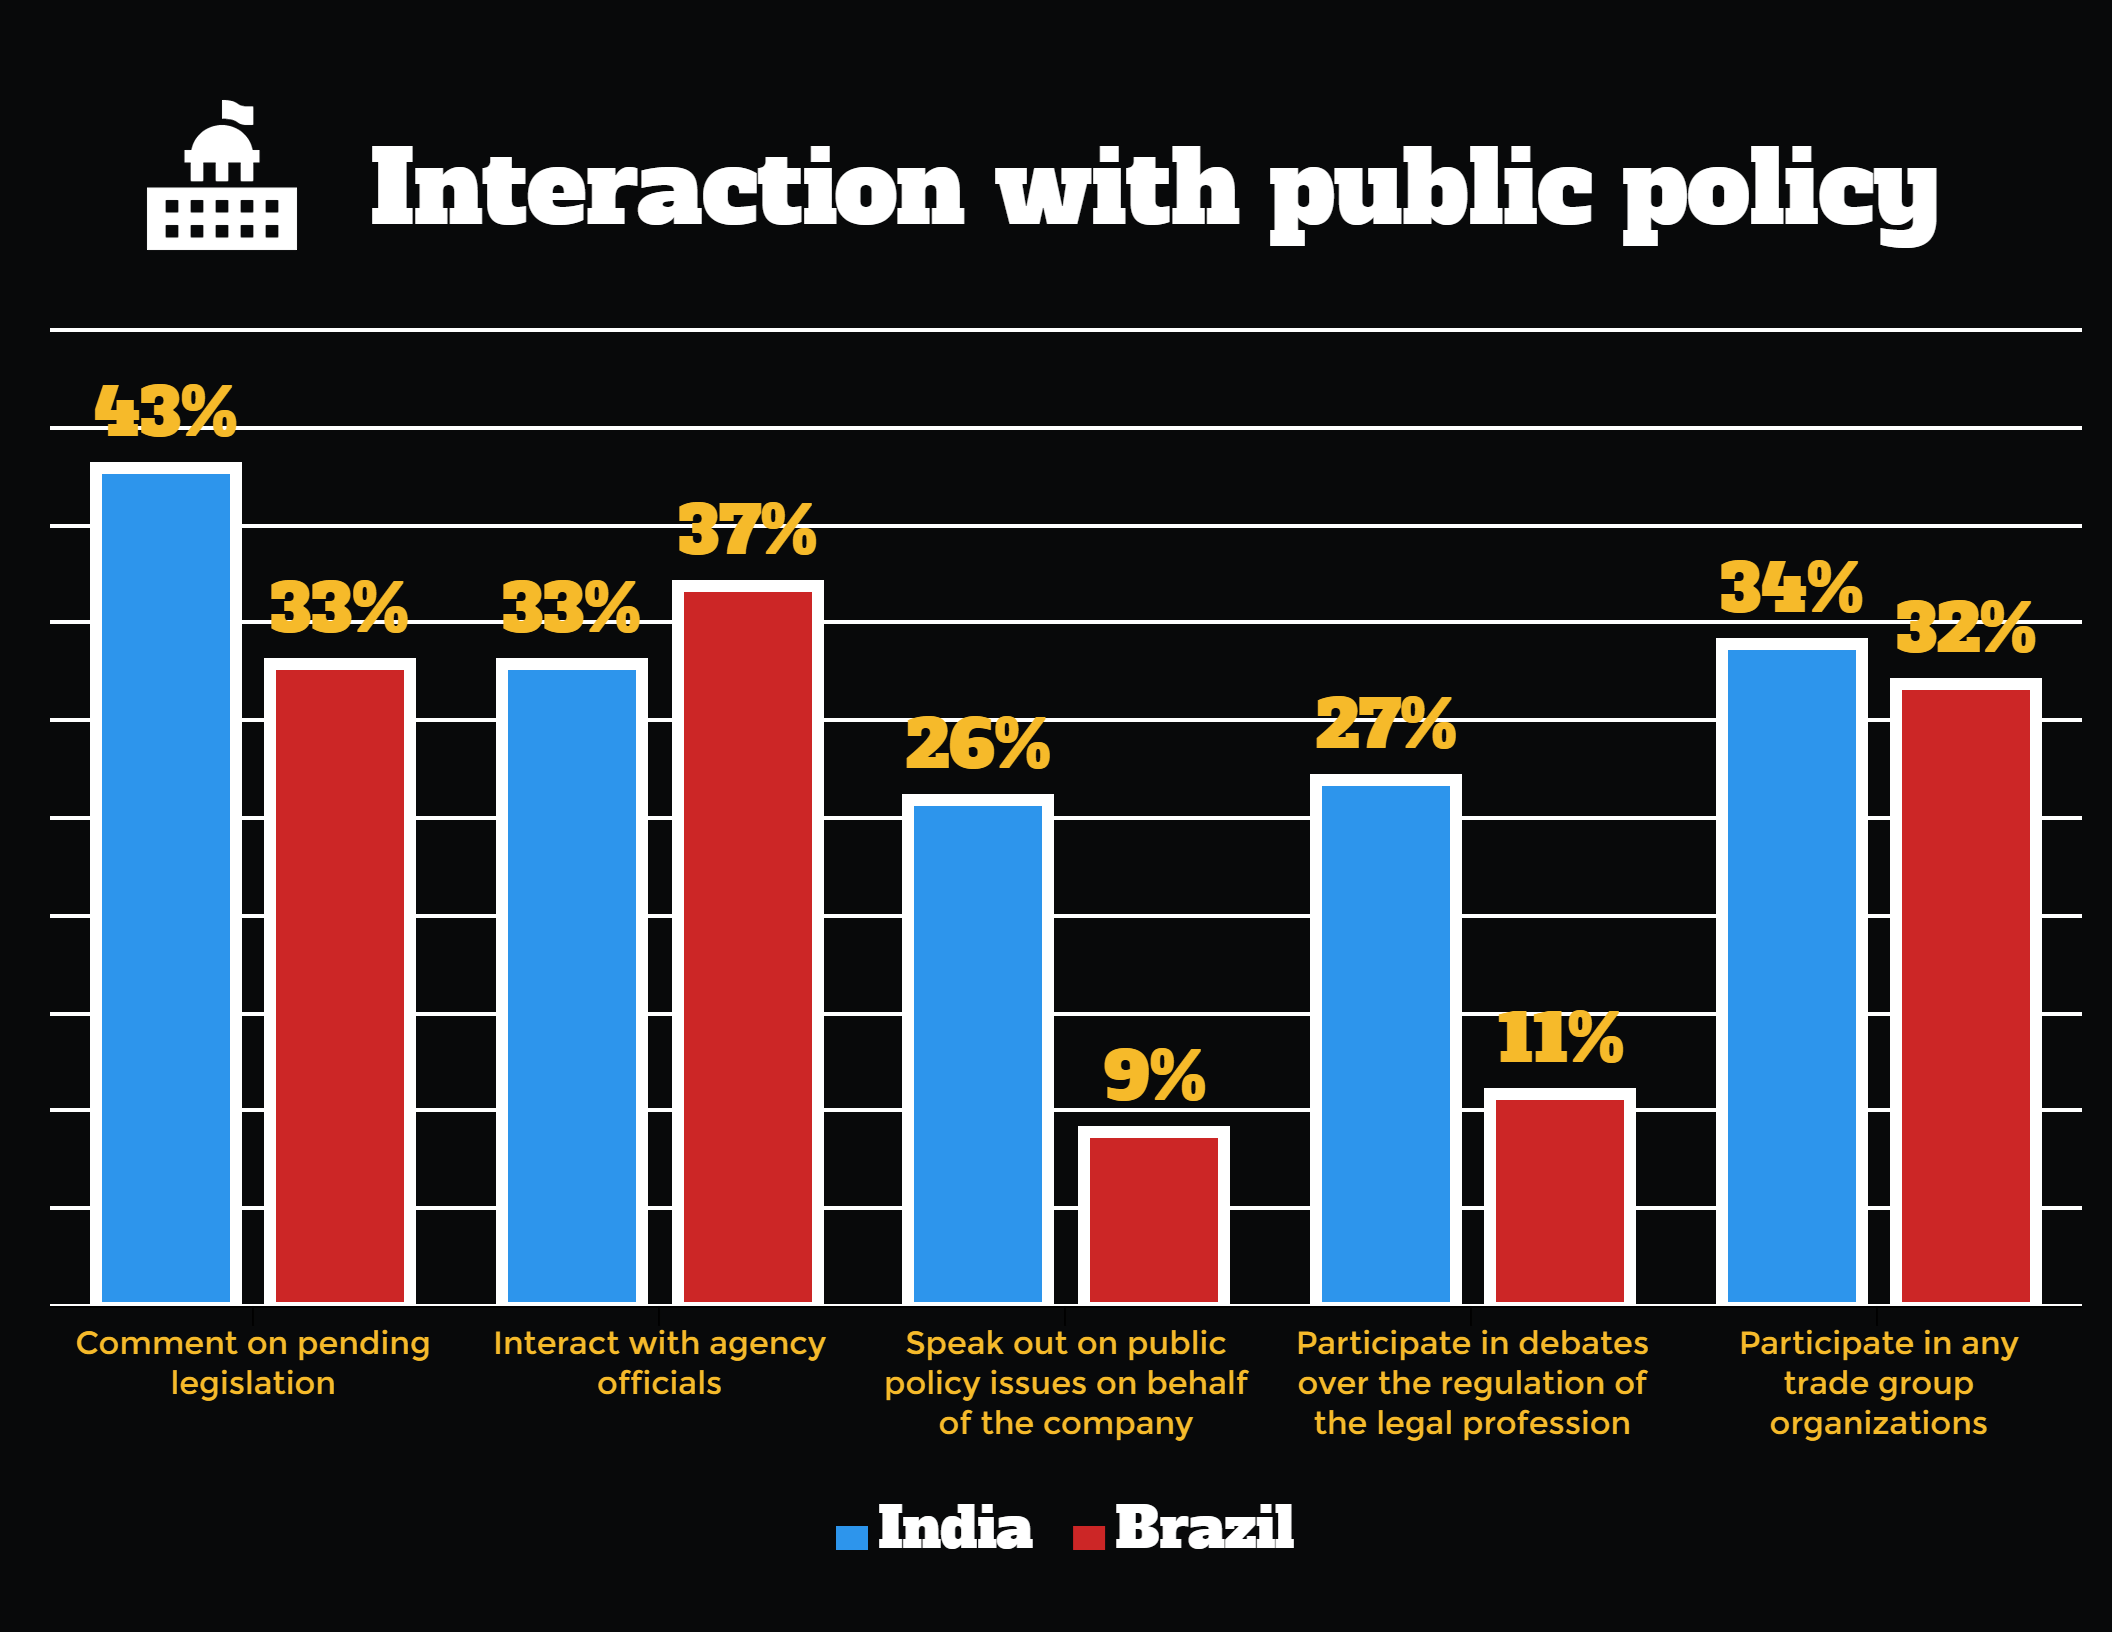 Different forms of interaction with Public Policy for GCs in India and Brazil.